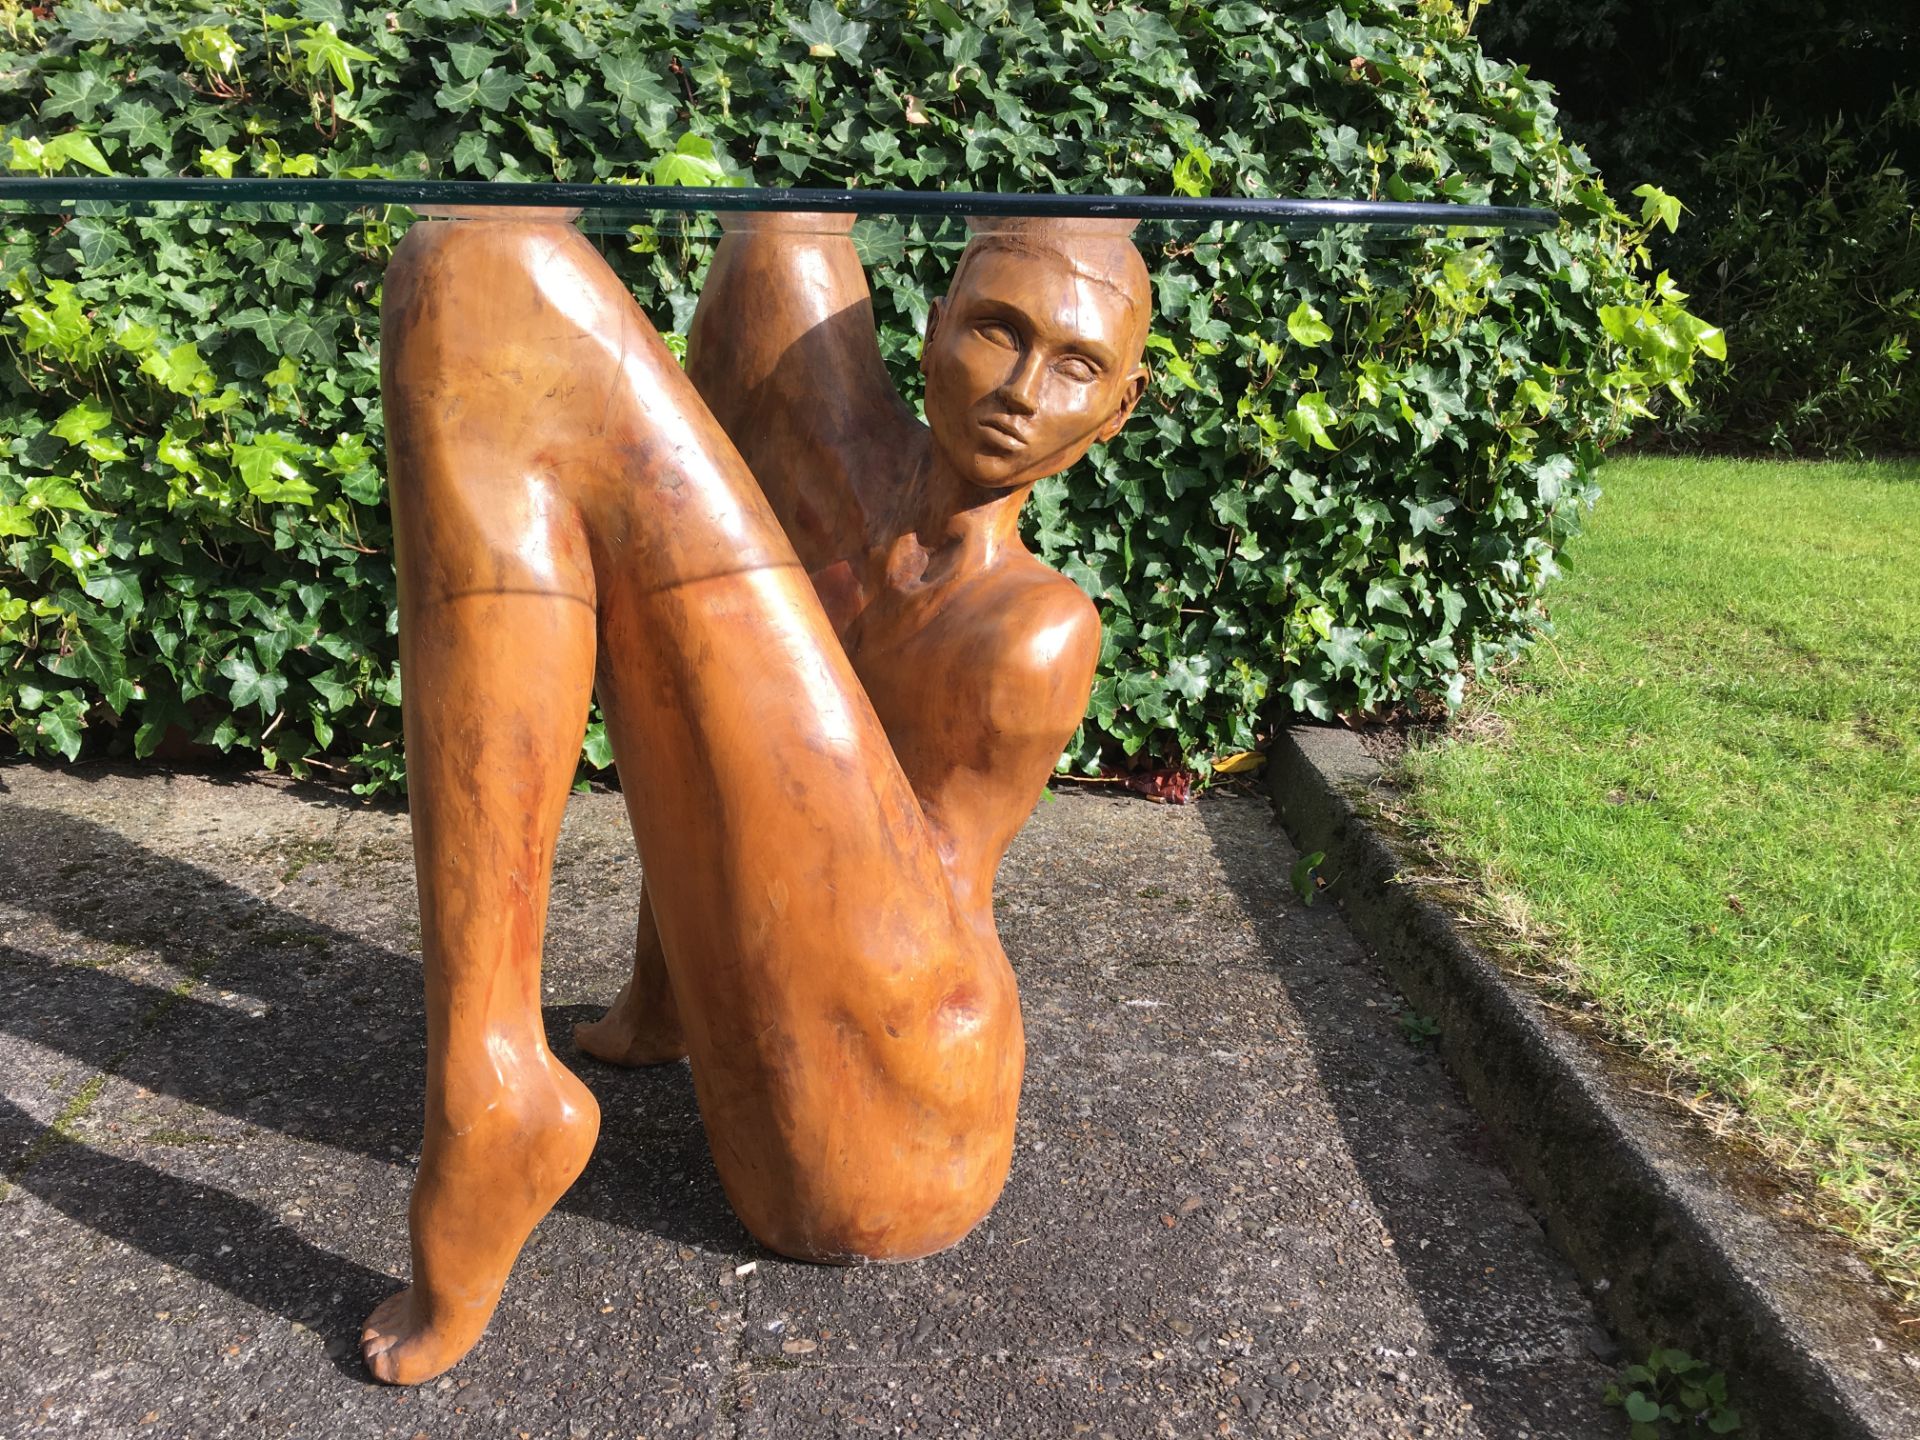 Carved Wood figurative sculptural table, 76 x 54 cms, with rounded triangular glass top - Image 3 of 12